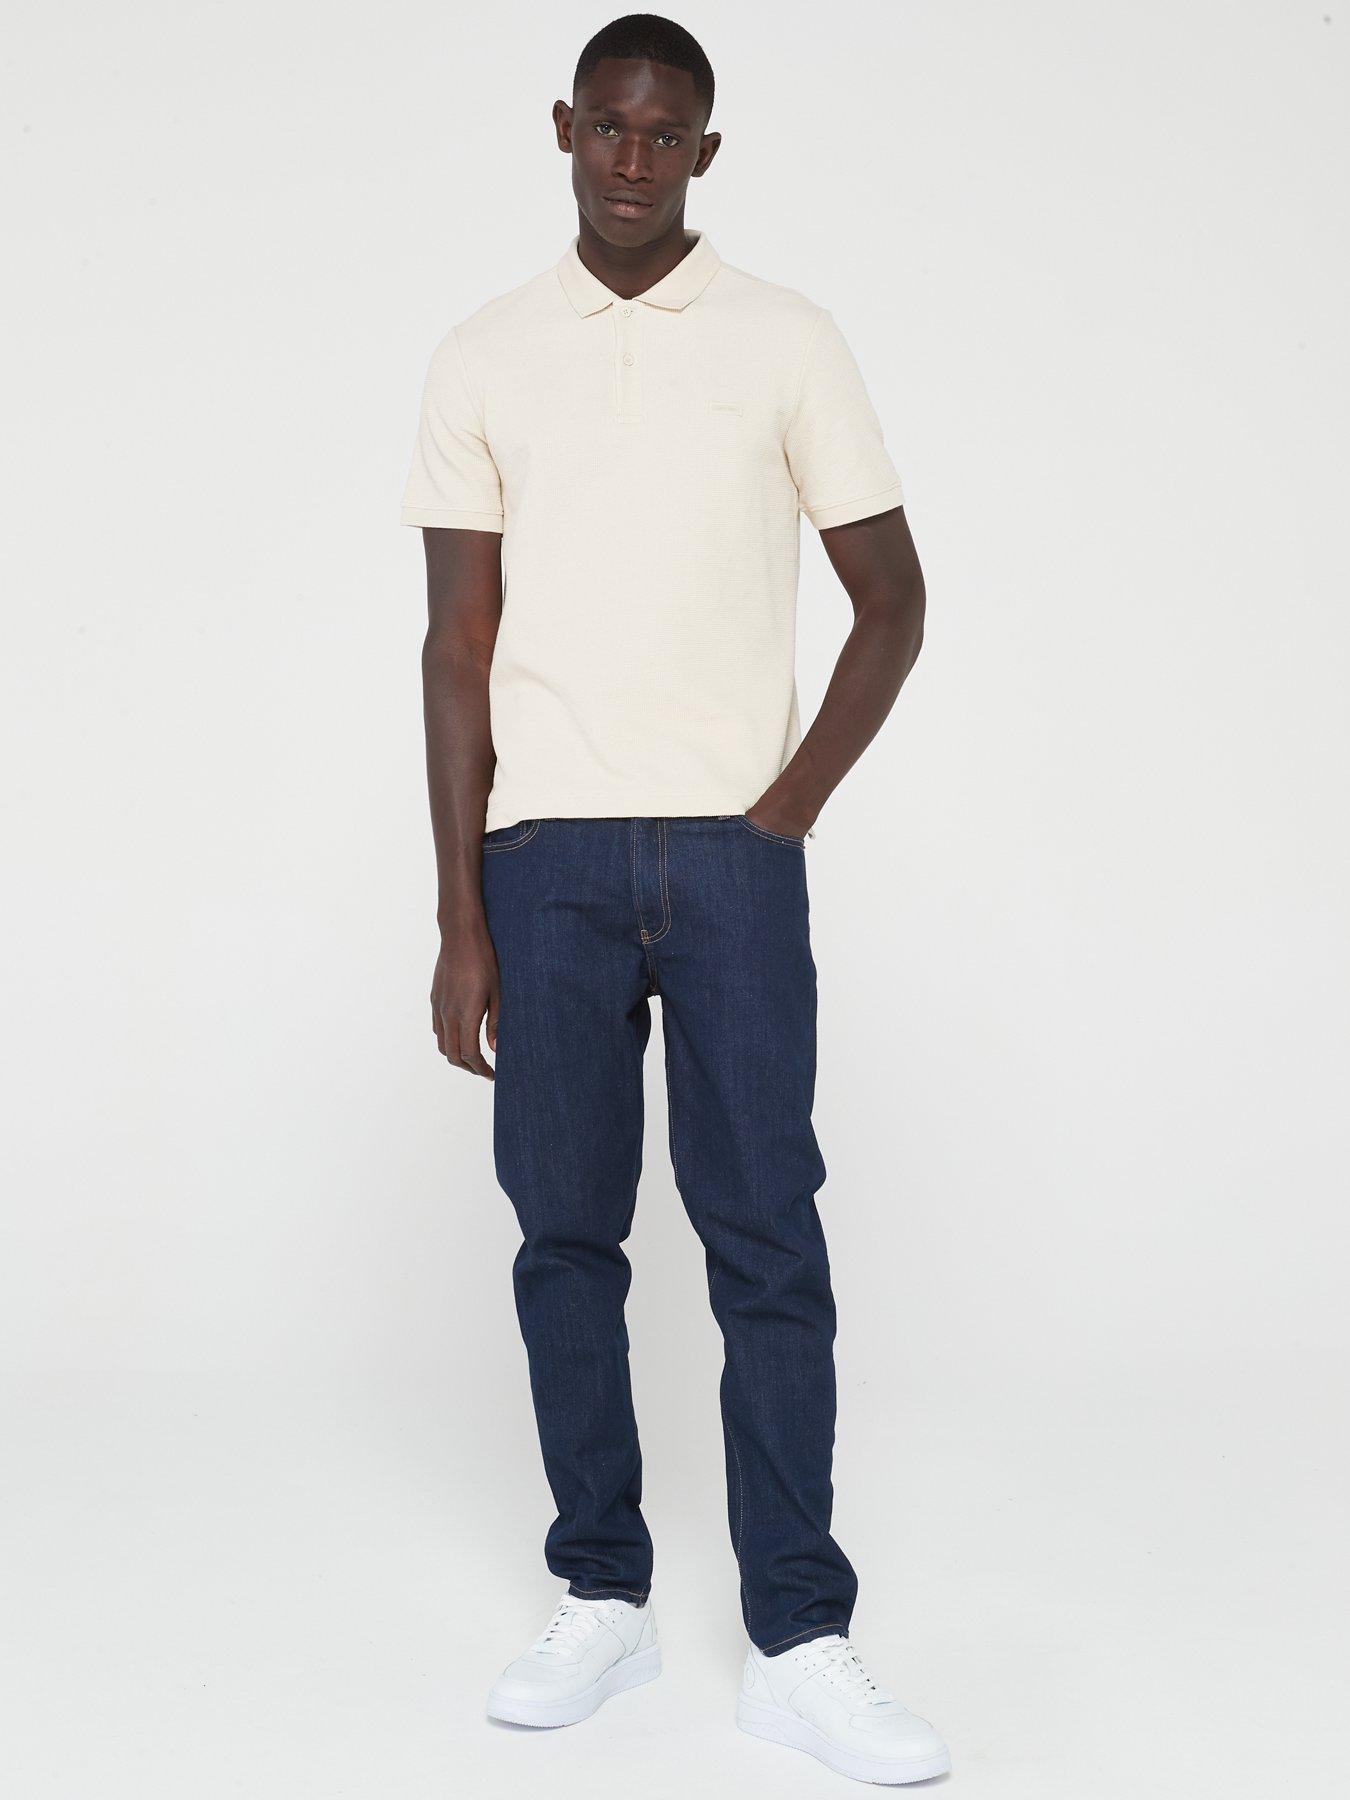 Calvin Klein Tapered Coolmax Jeans - Mid Blue